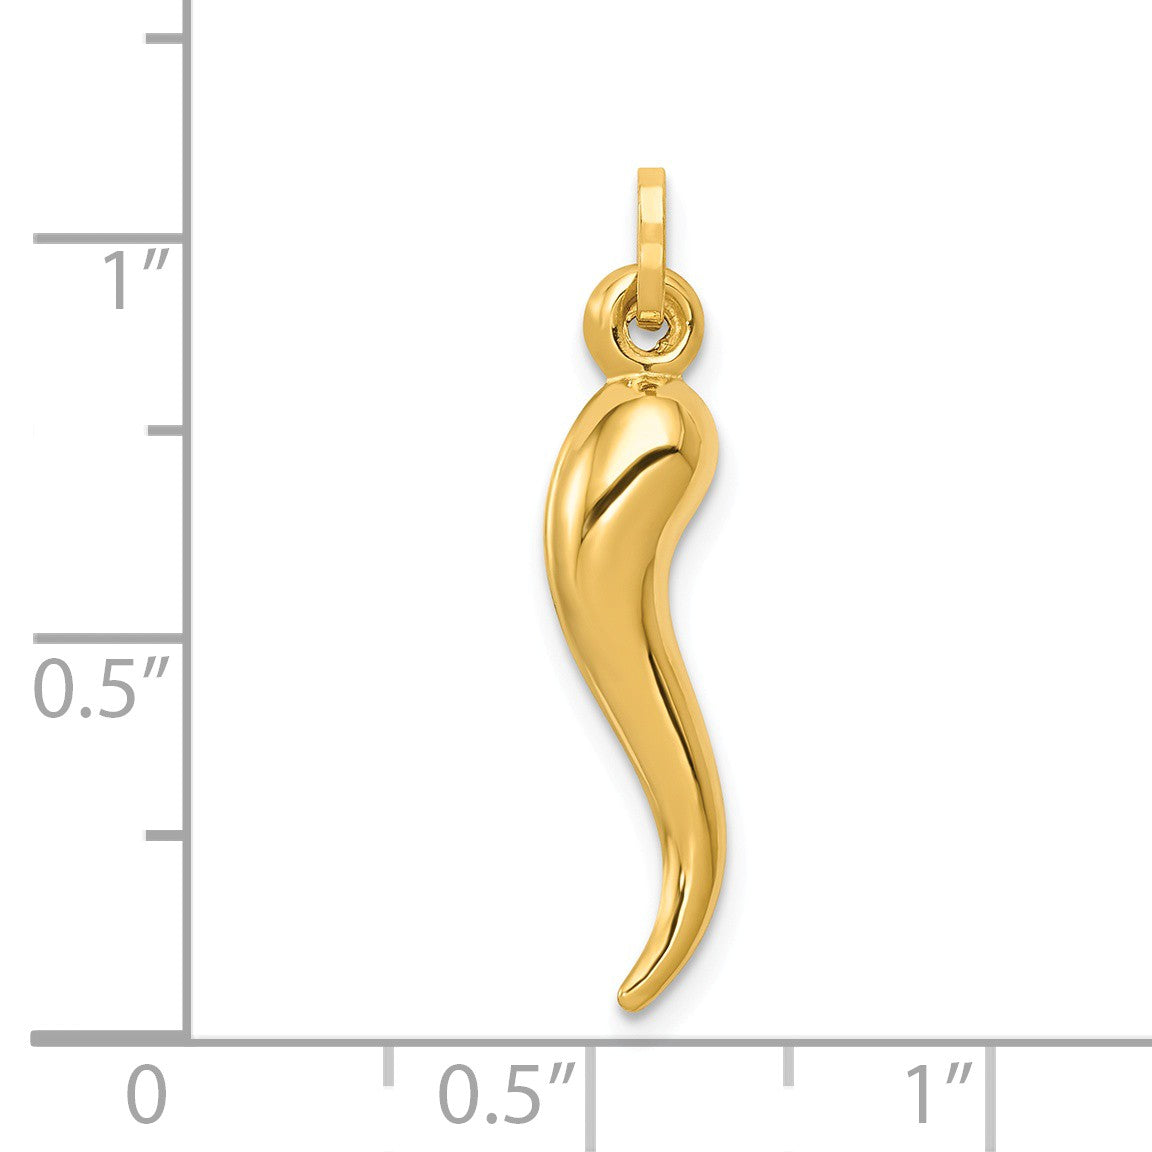 Alternate view of the 14k Yellow Gold 3D Hollow Italian Horn Pendant, 5 x 28mm by The Black Bow Jewelry Co.